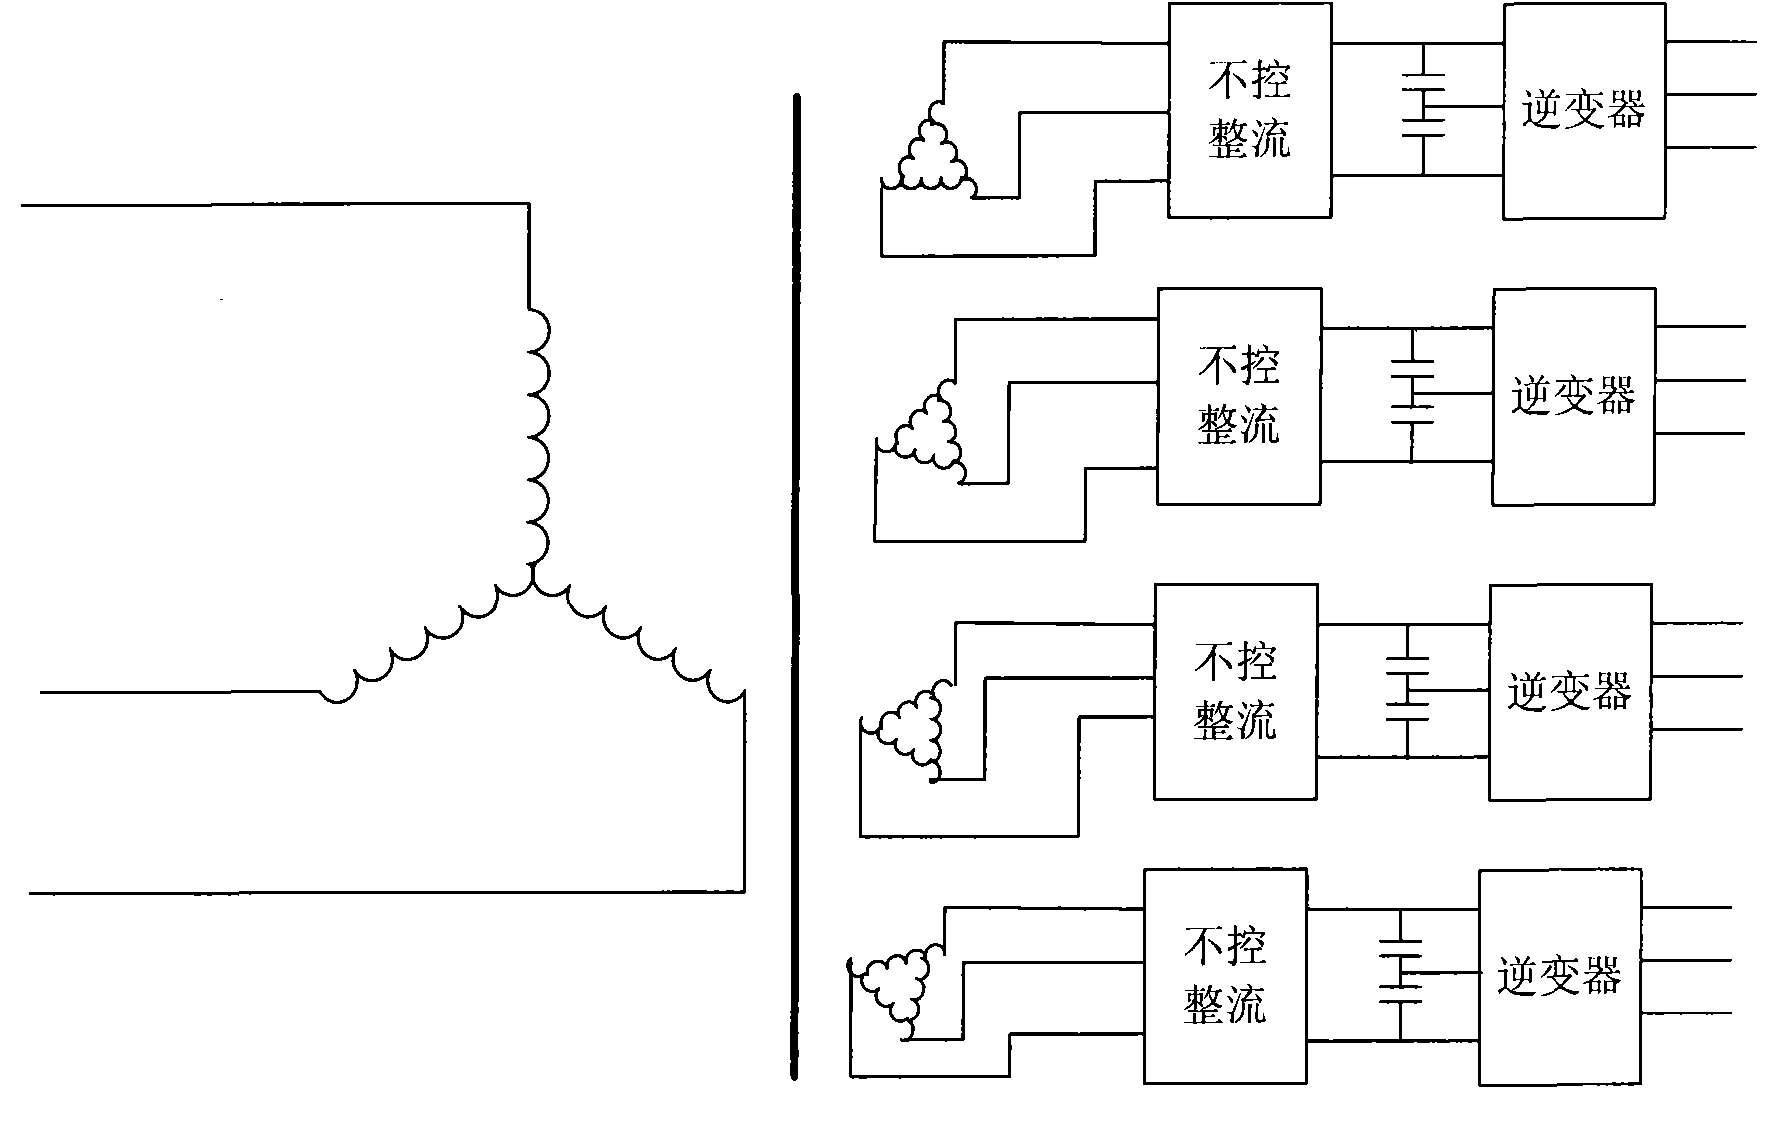 Large capacity cascade multi-phase multi-level power converter without transformer